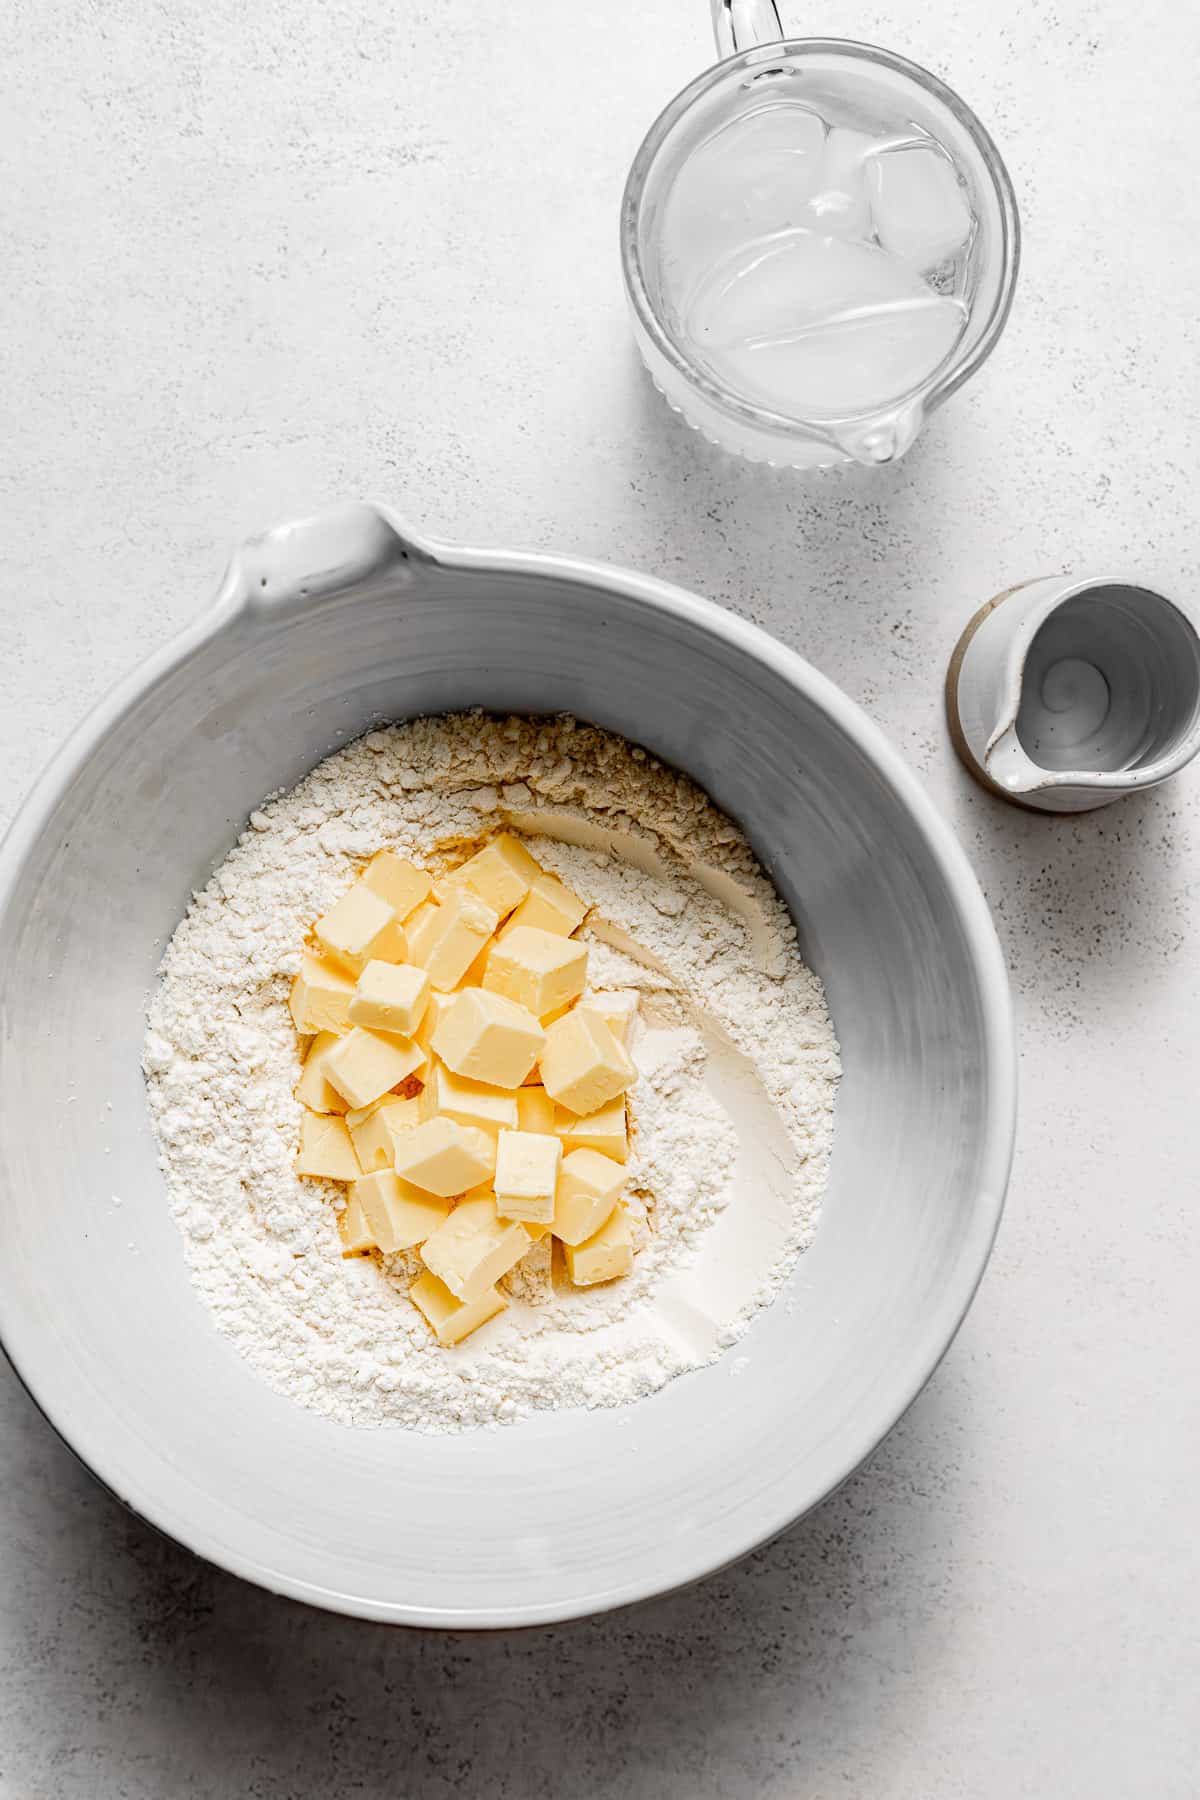 flour and butter in mixing bowl.